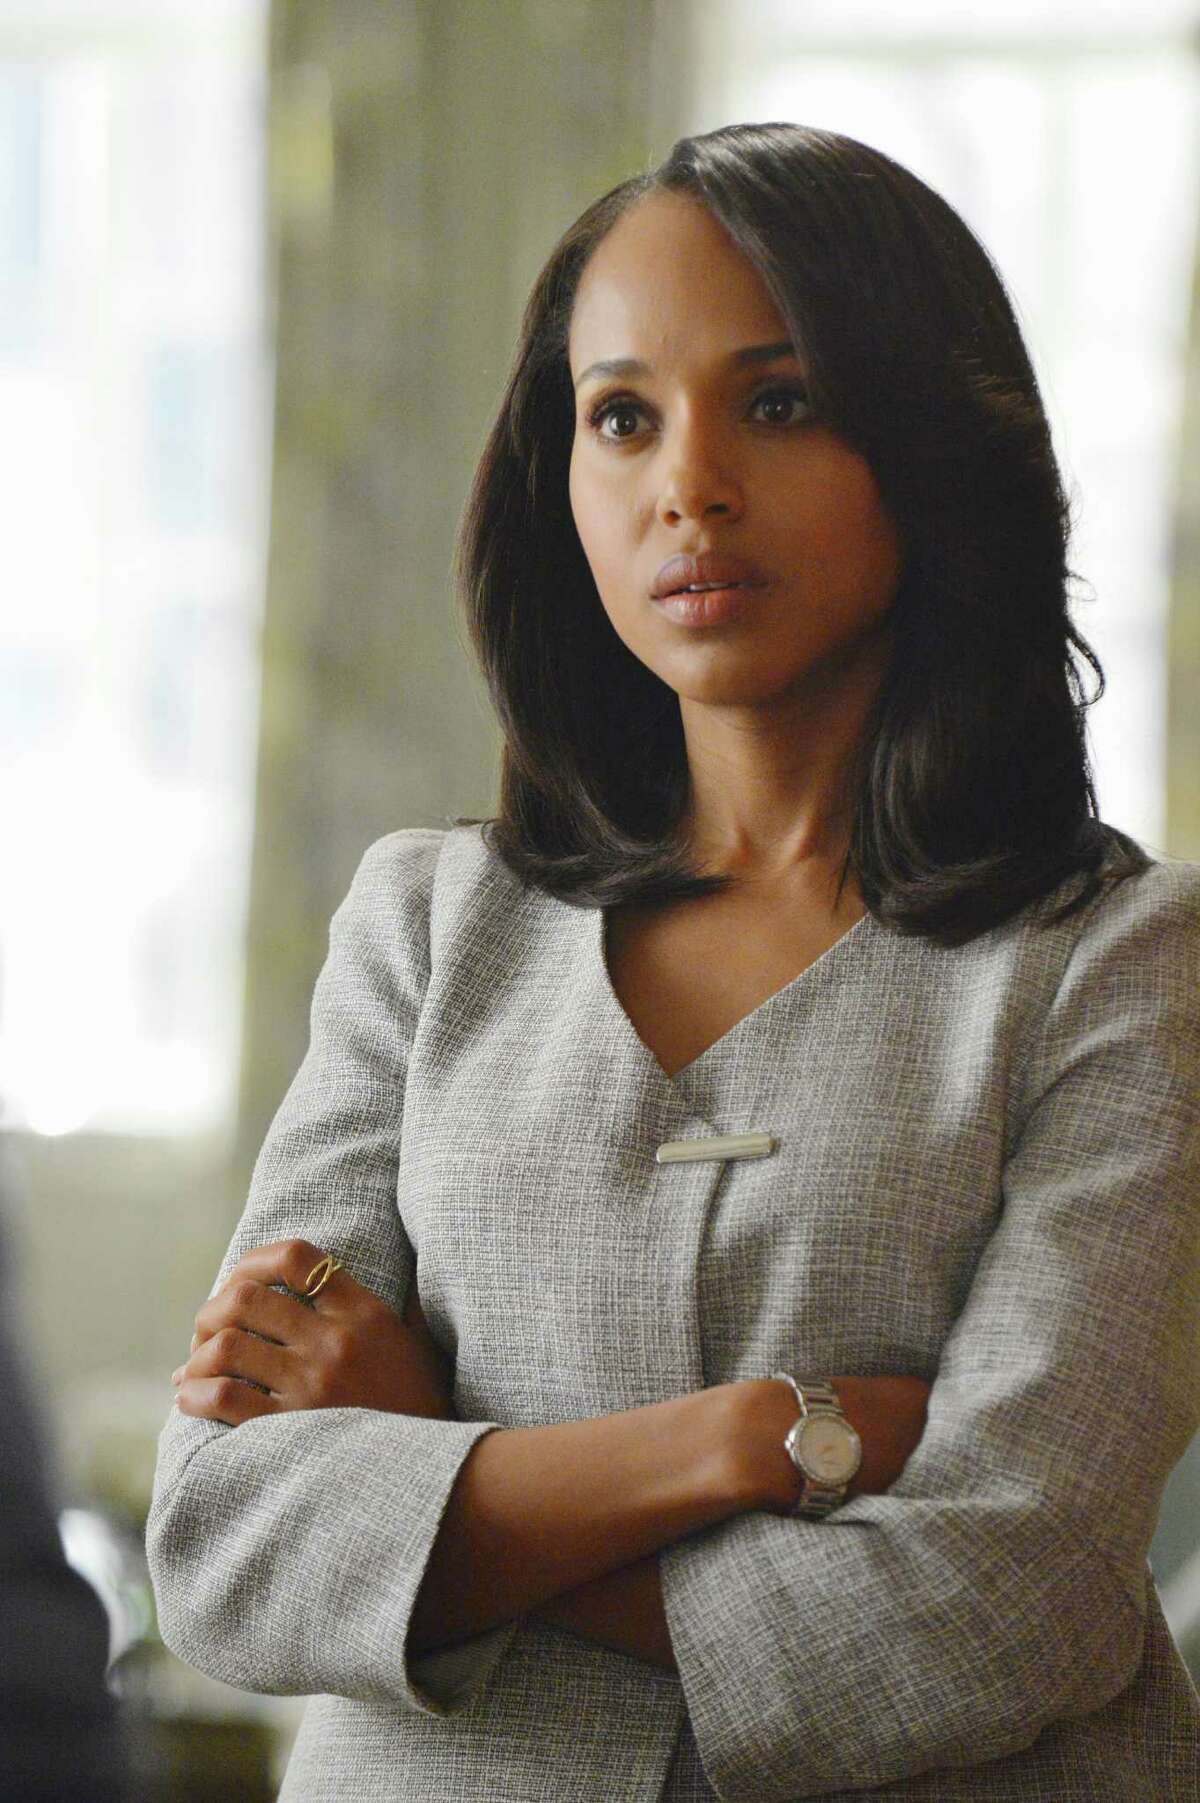 Kerry Washington plays political super-fixer Olivia Pope. Washington, who's married to football player Nnamdi Asomugha (NAHM'-dee AH'-suhm-wah), is pregnant, which may be part of the reason why ABC is shortening the current season by three episodes.